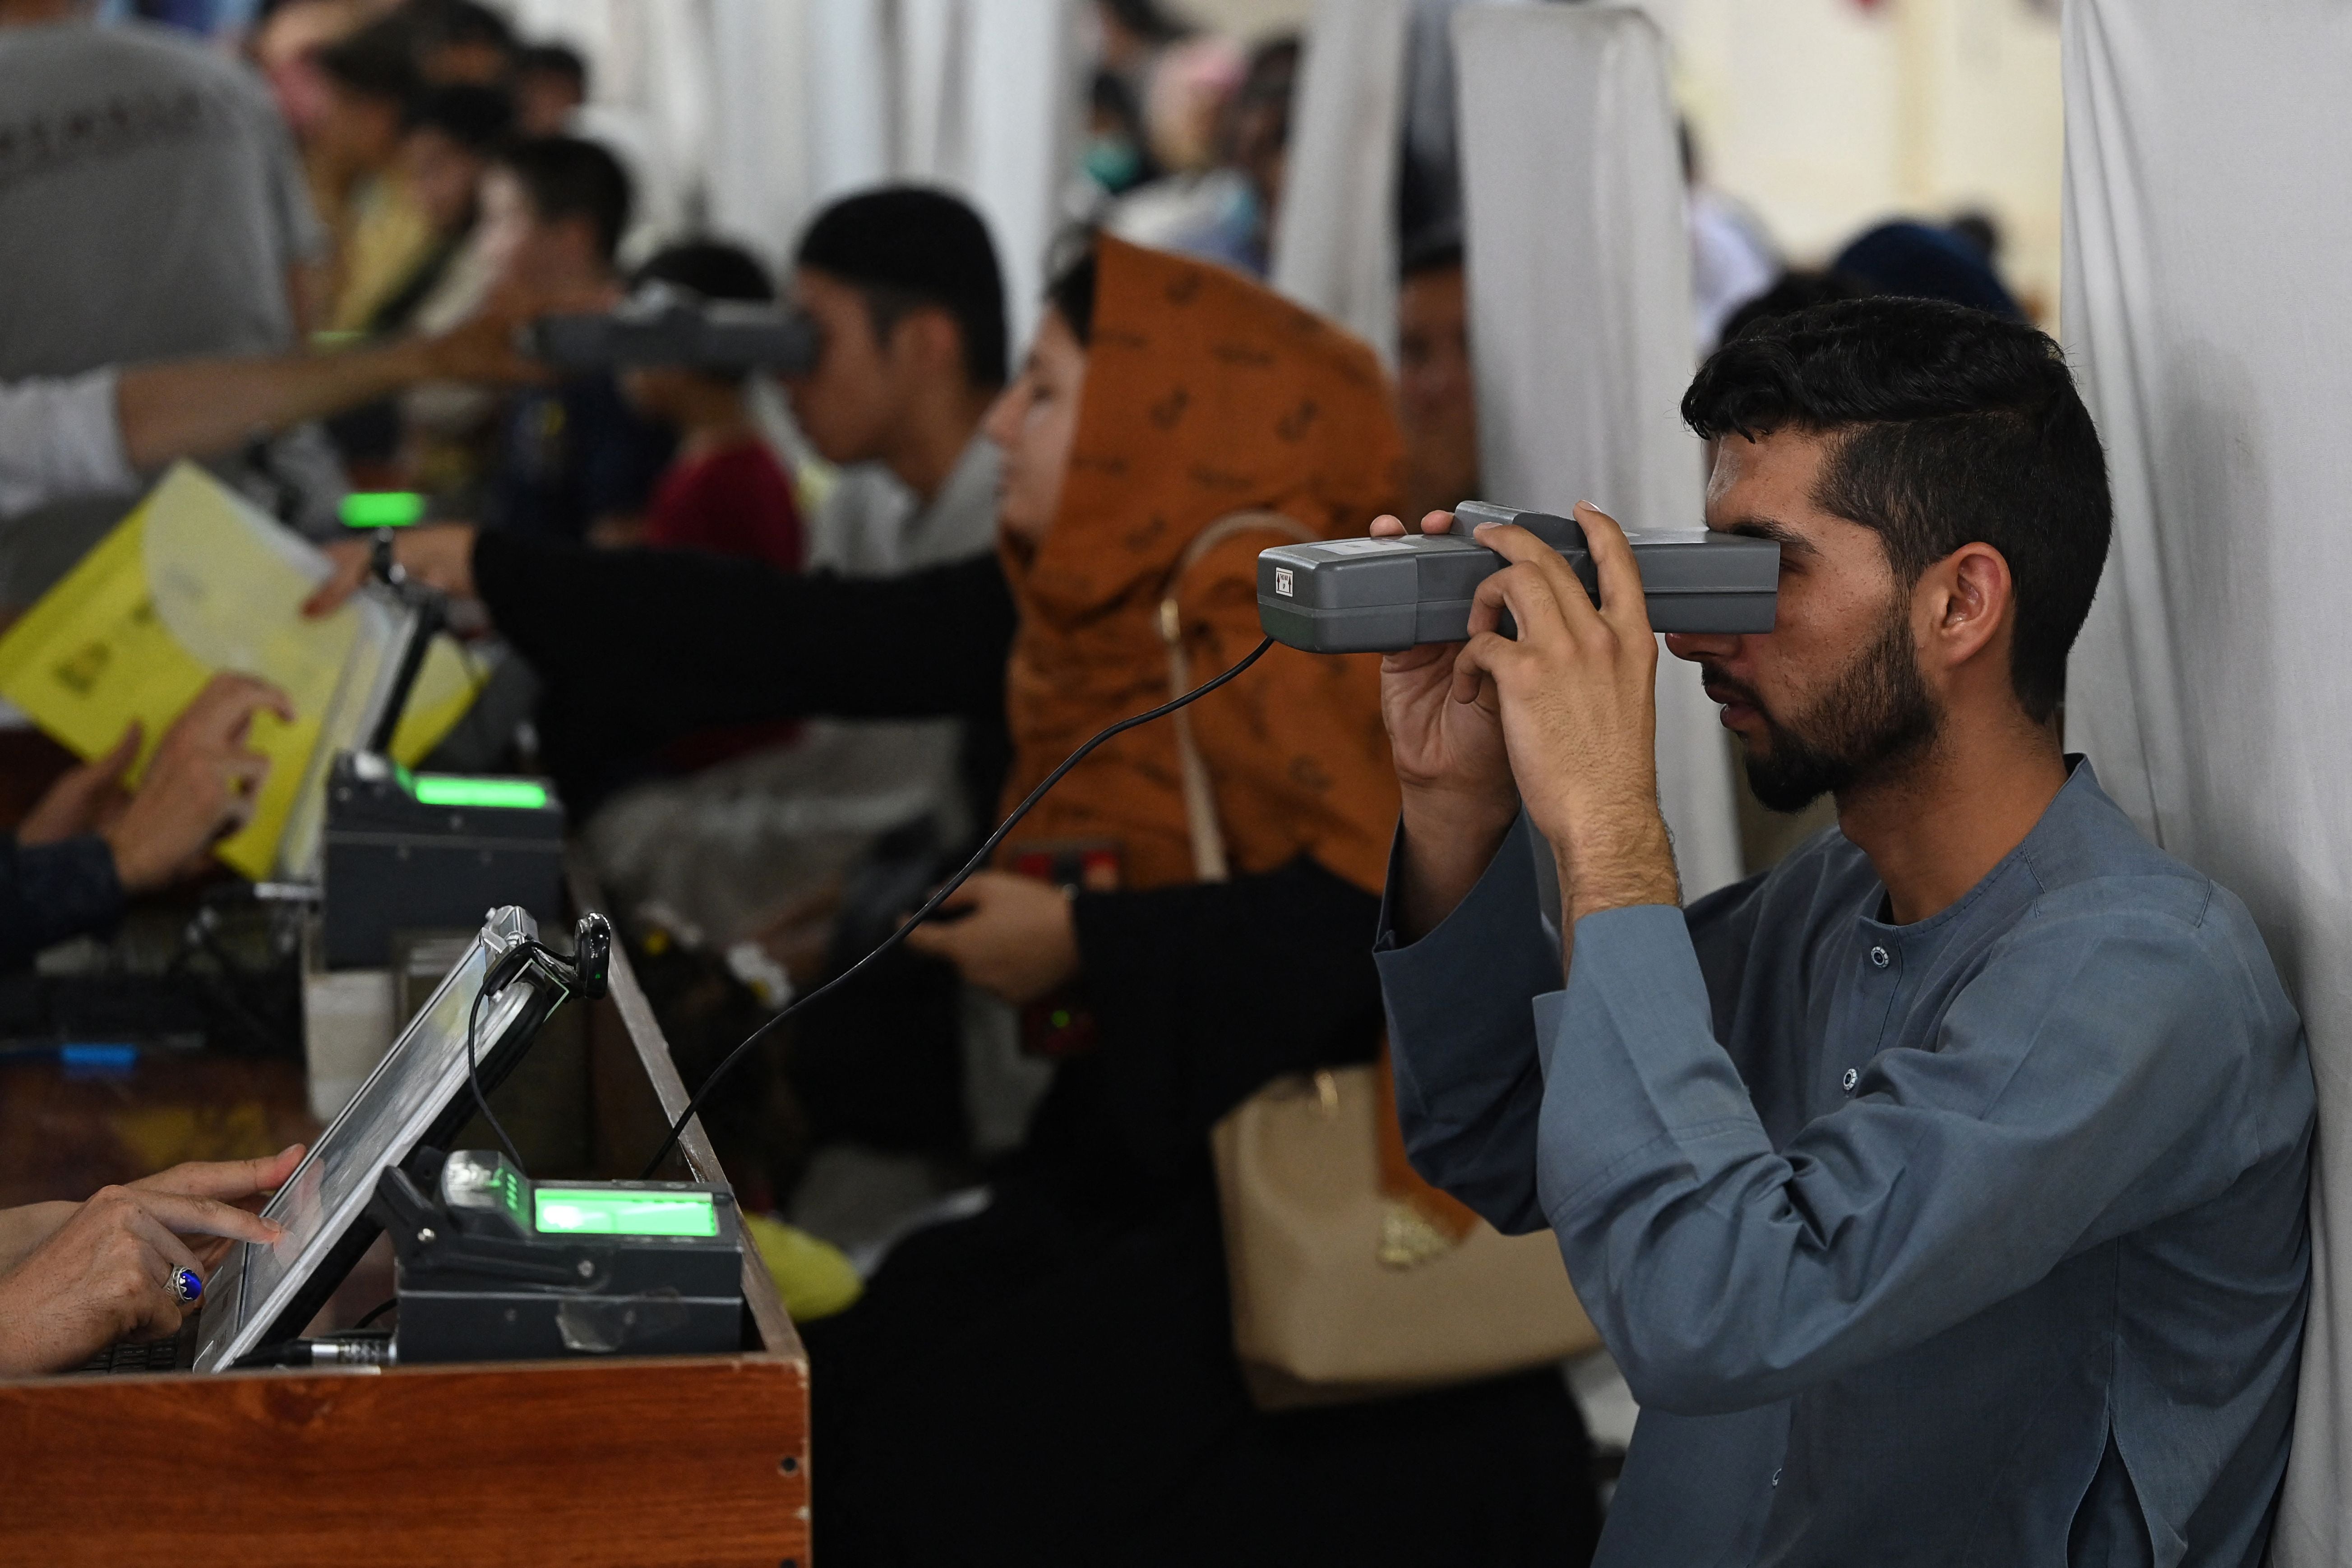 <p>File: A man looks through an optical biometric reader to submit his passport application at an office in Kabul on 25 July 2021</p>